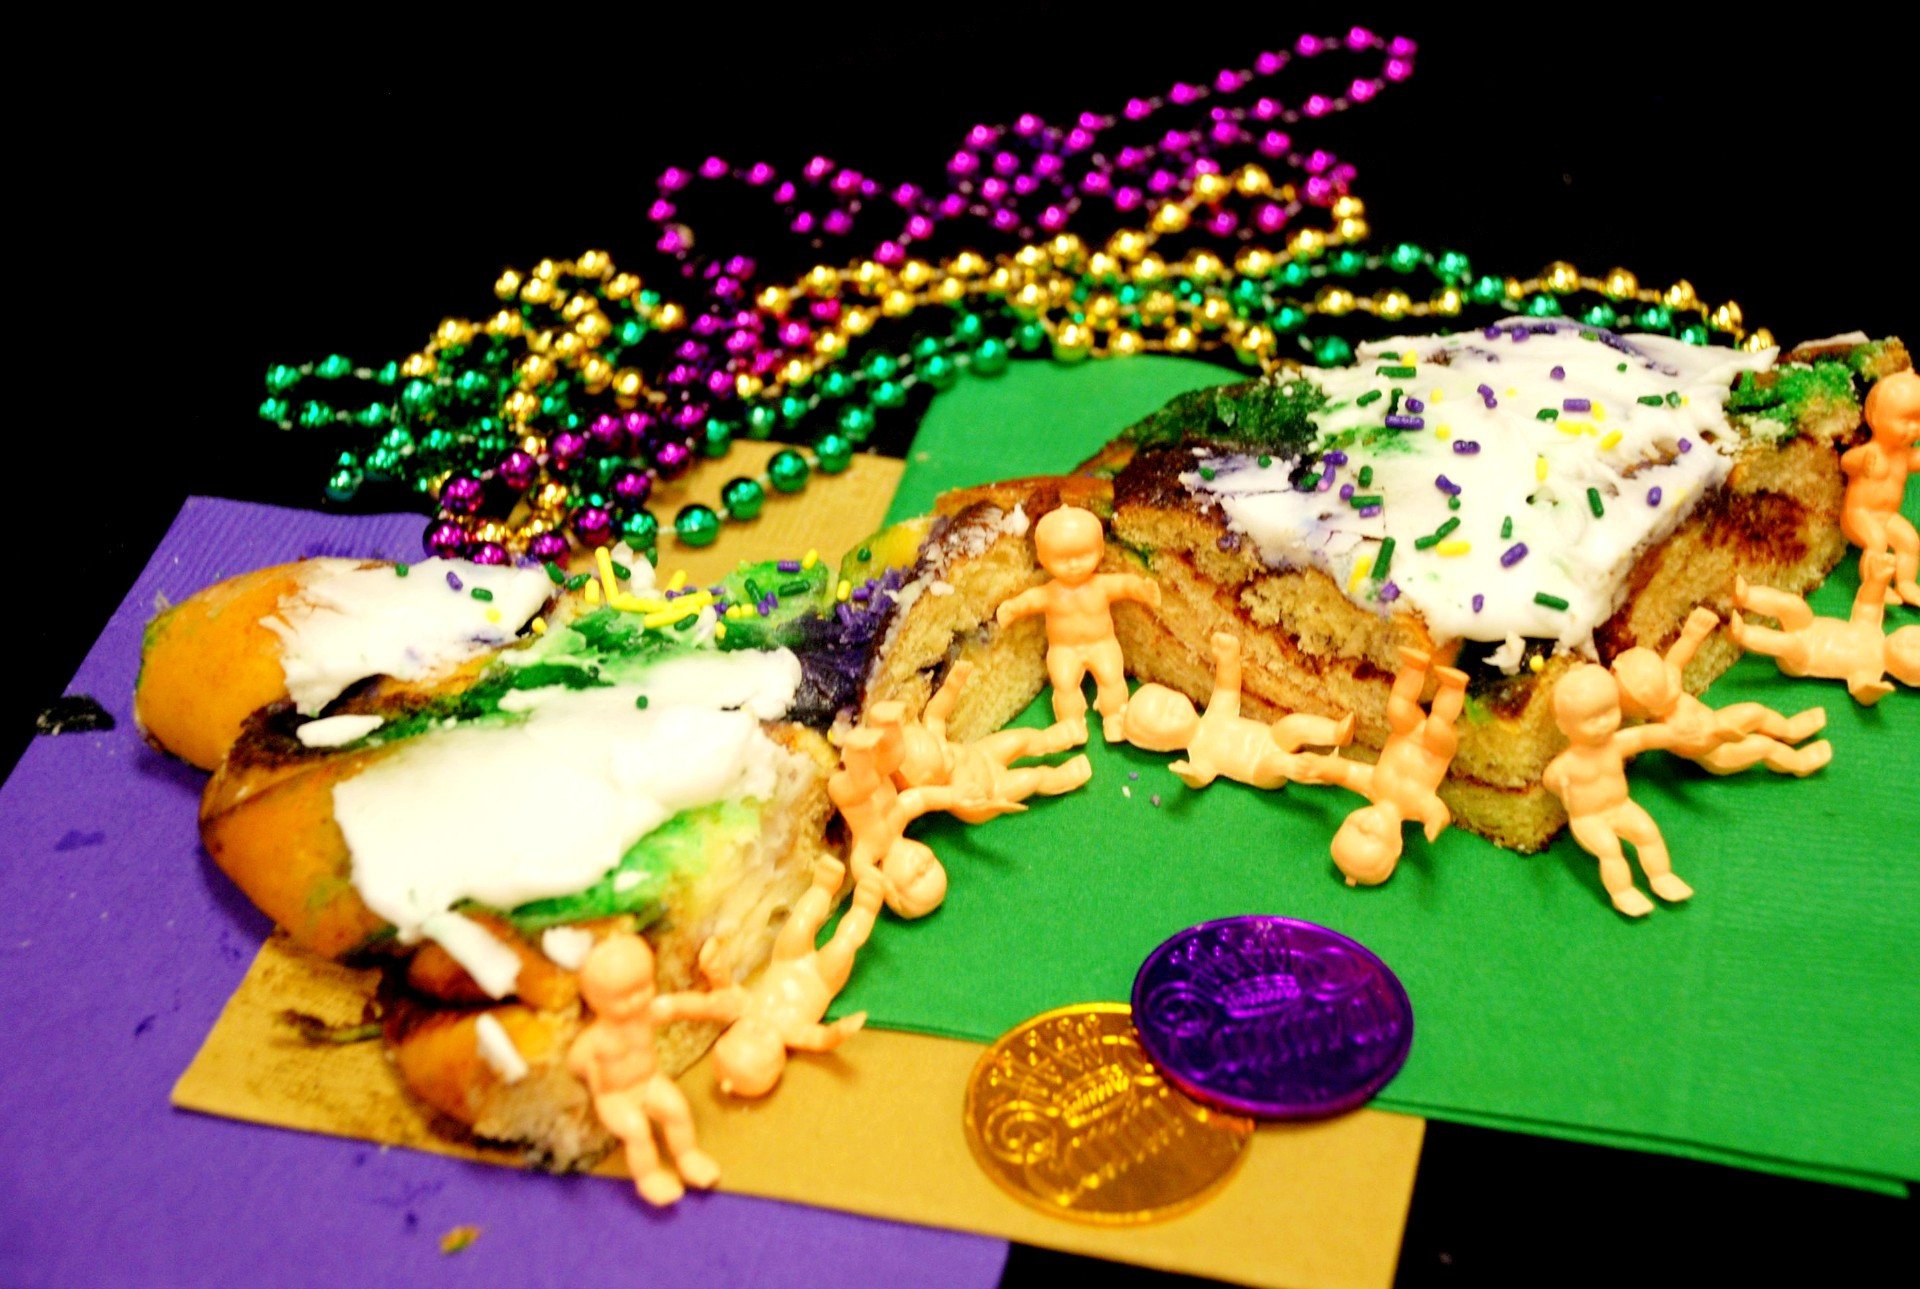 Why is there a baby in the king cake?